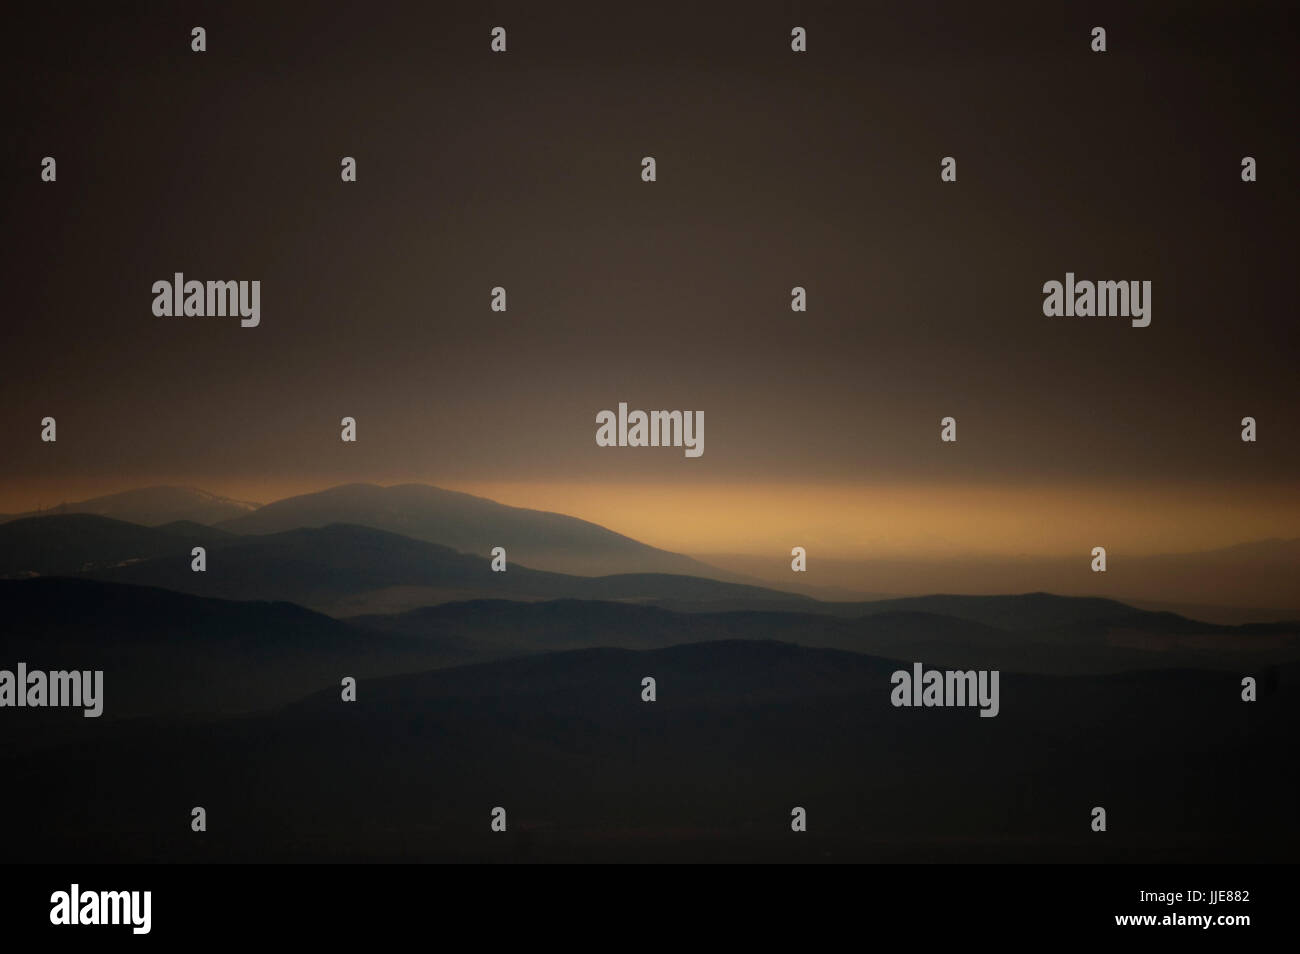 dark sky landscape with mountains and hills Stock Photo